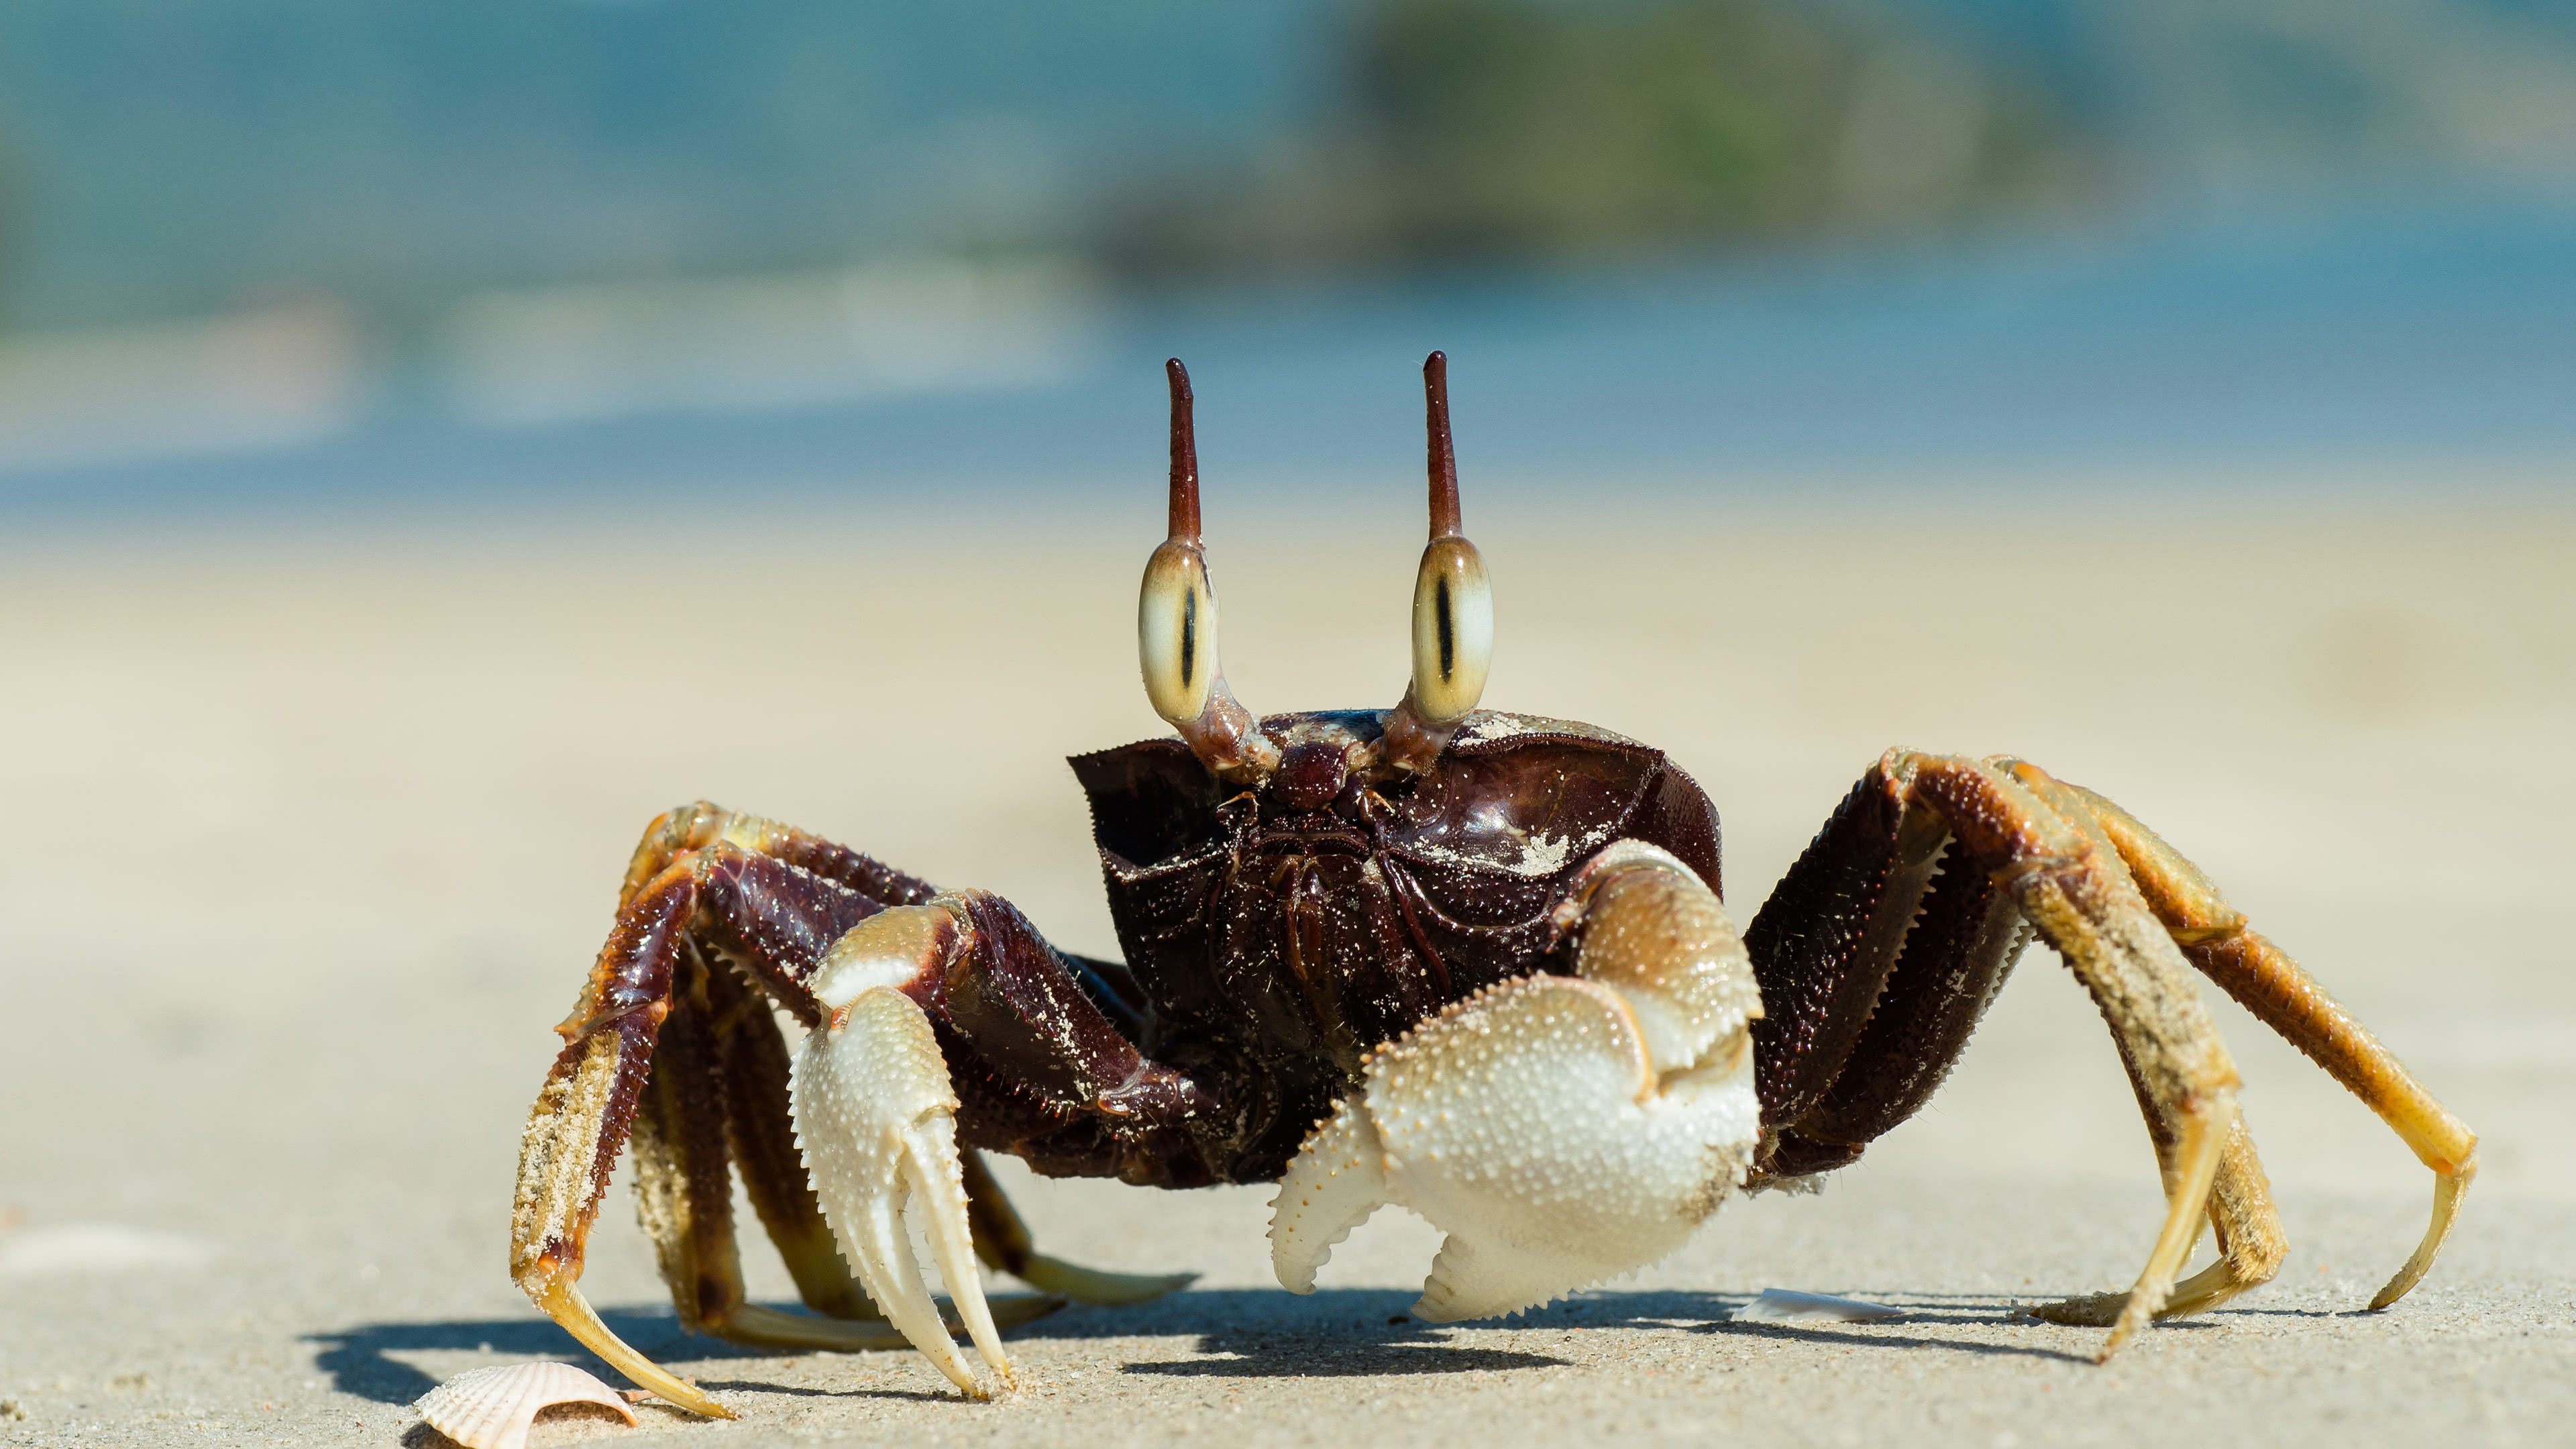 Crab: Ghost crab, Armed with a pair of chelae (claws) animal. 3840x2160 4K Wallpaper.